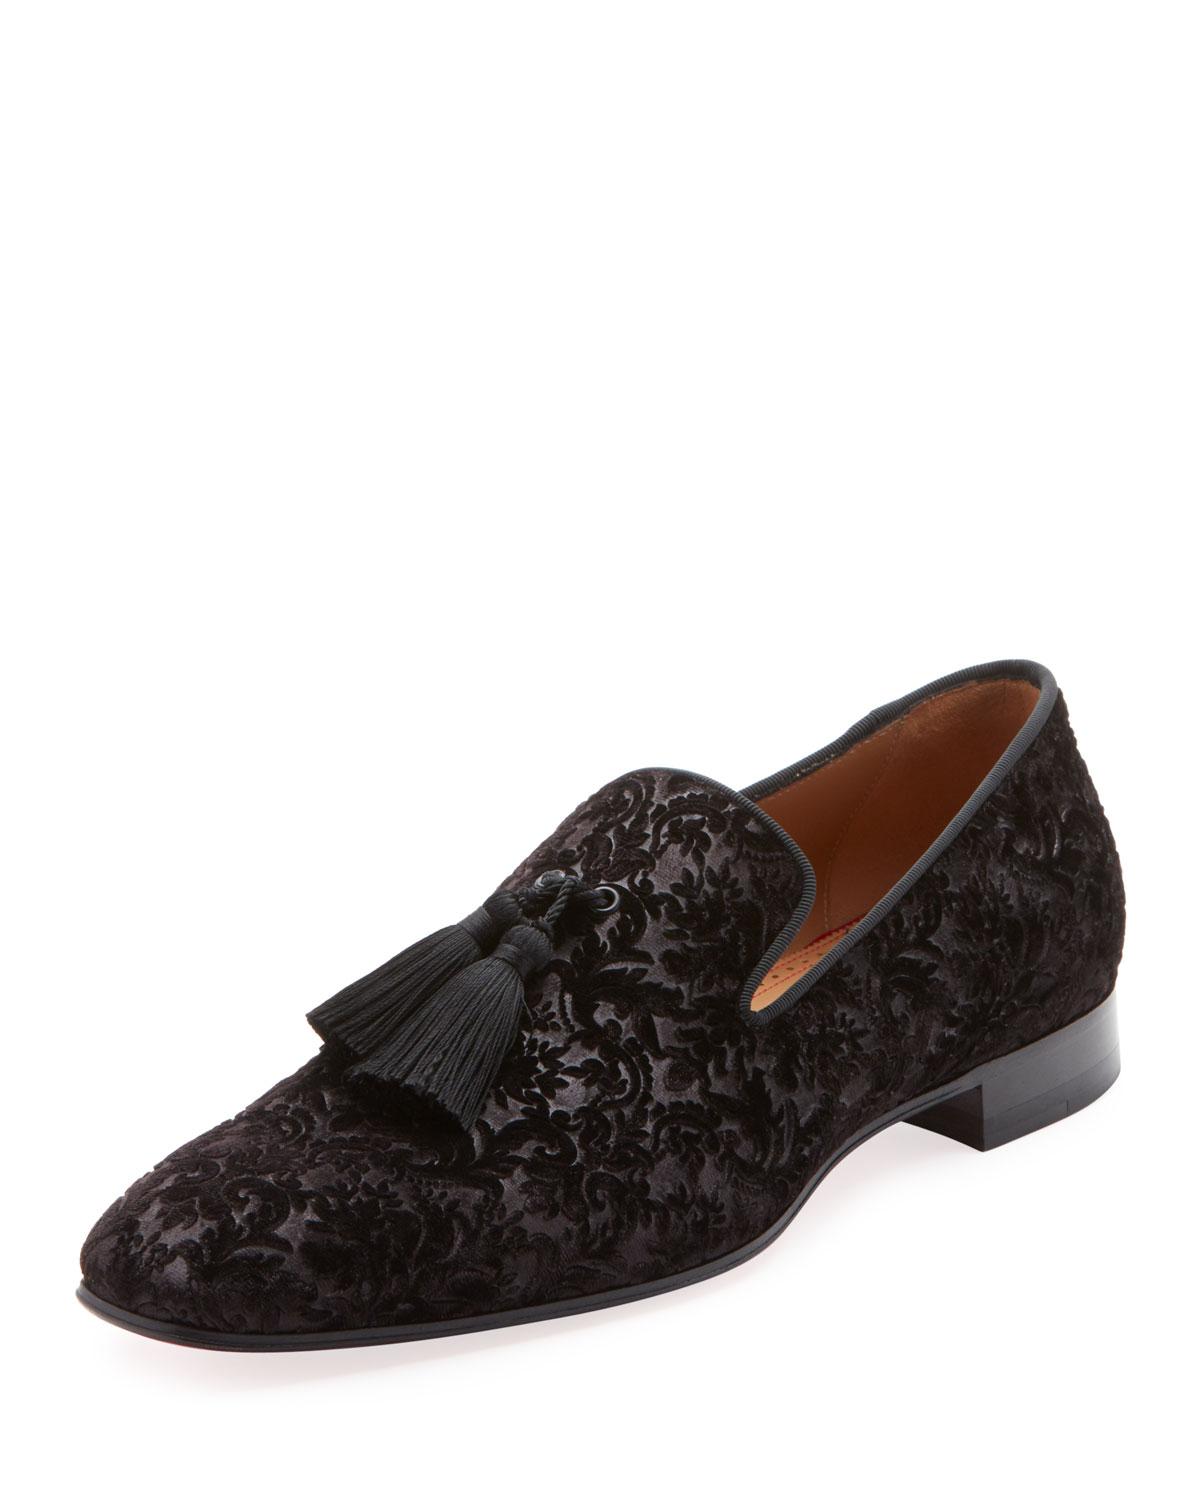 christian louboutin loafers for men